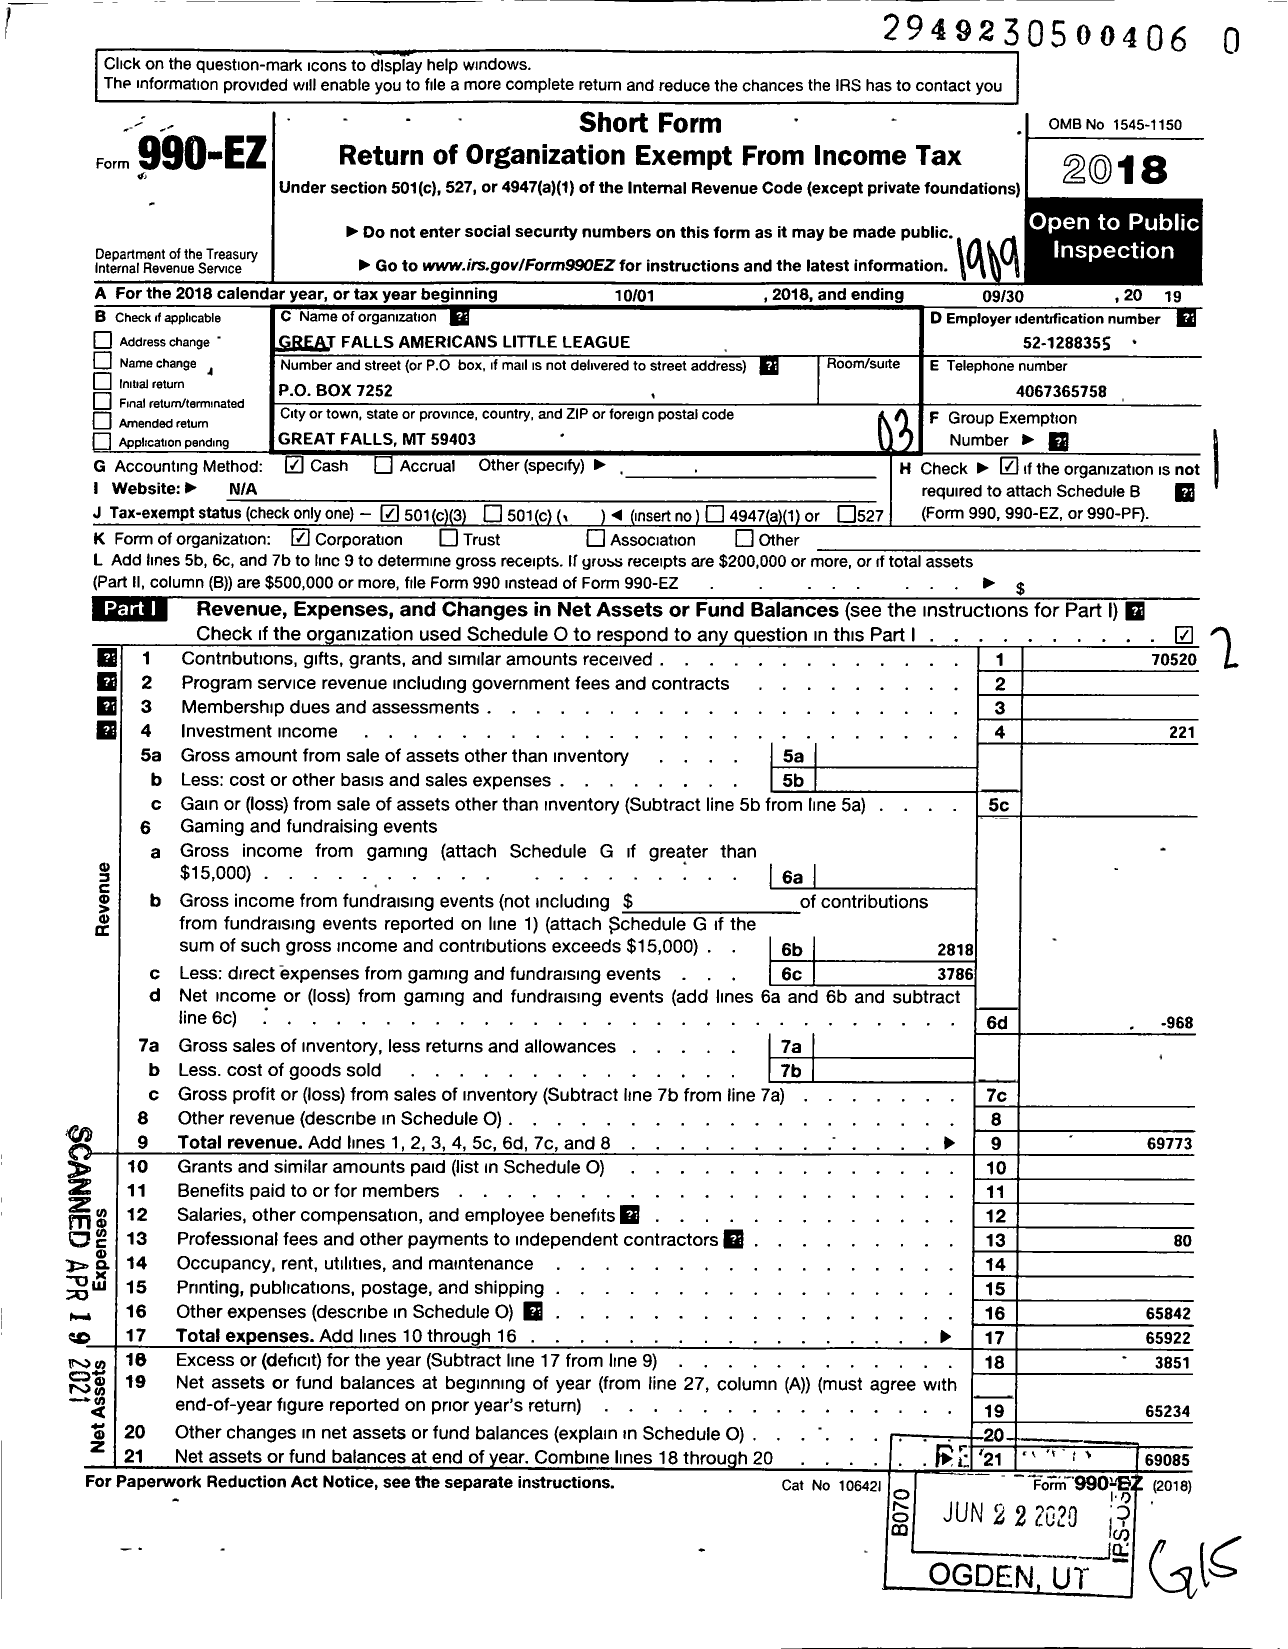 Image of first page of 2018 Form 990EZ for Little League Baseball - 4260202 Great Falls Americans LL